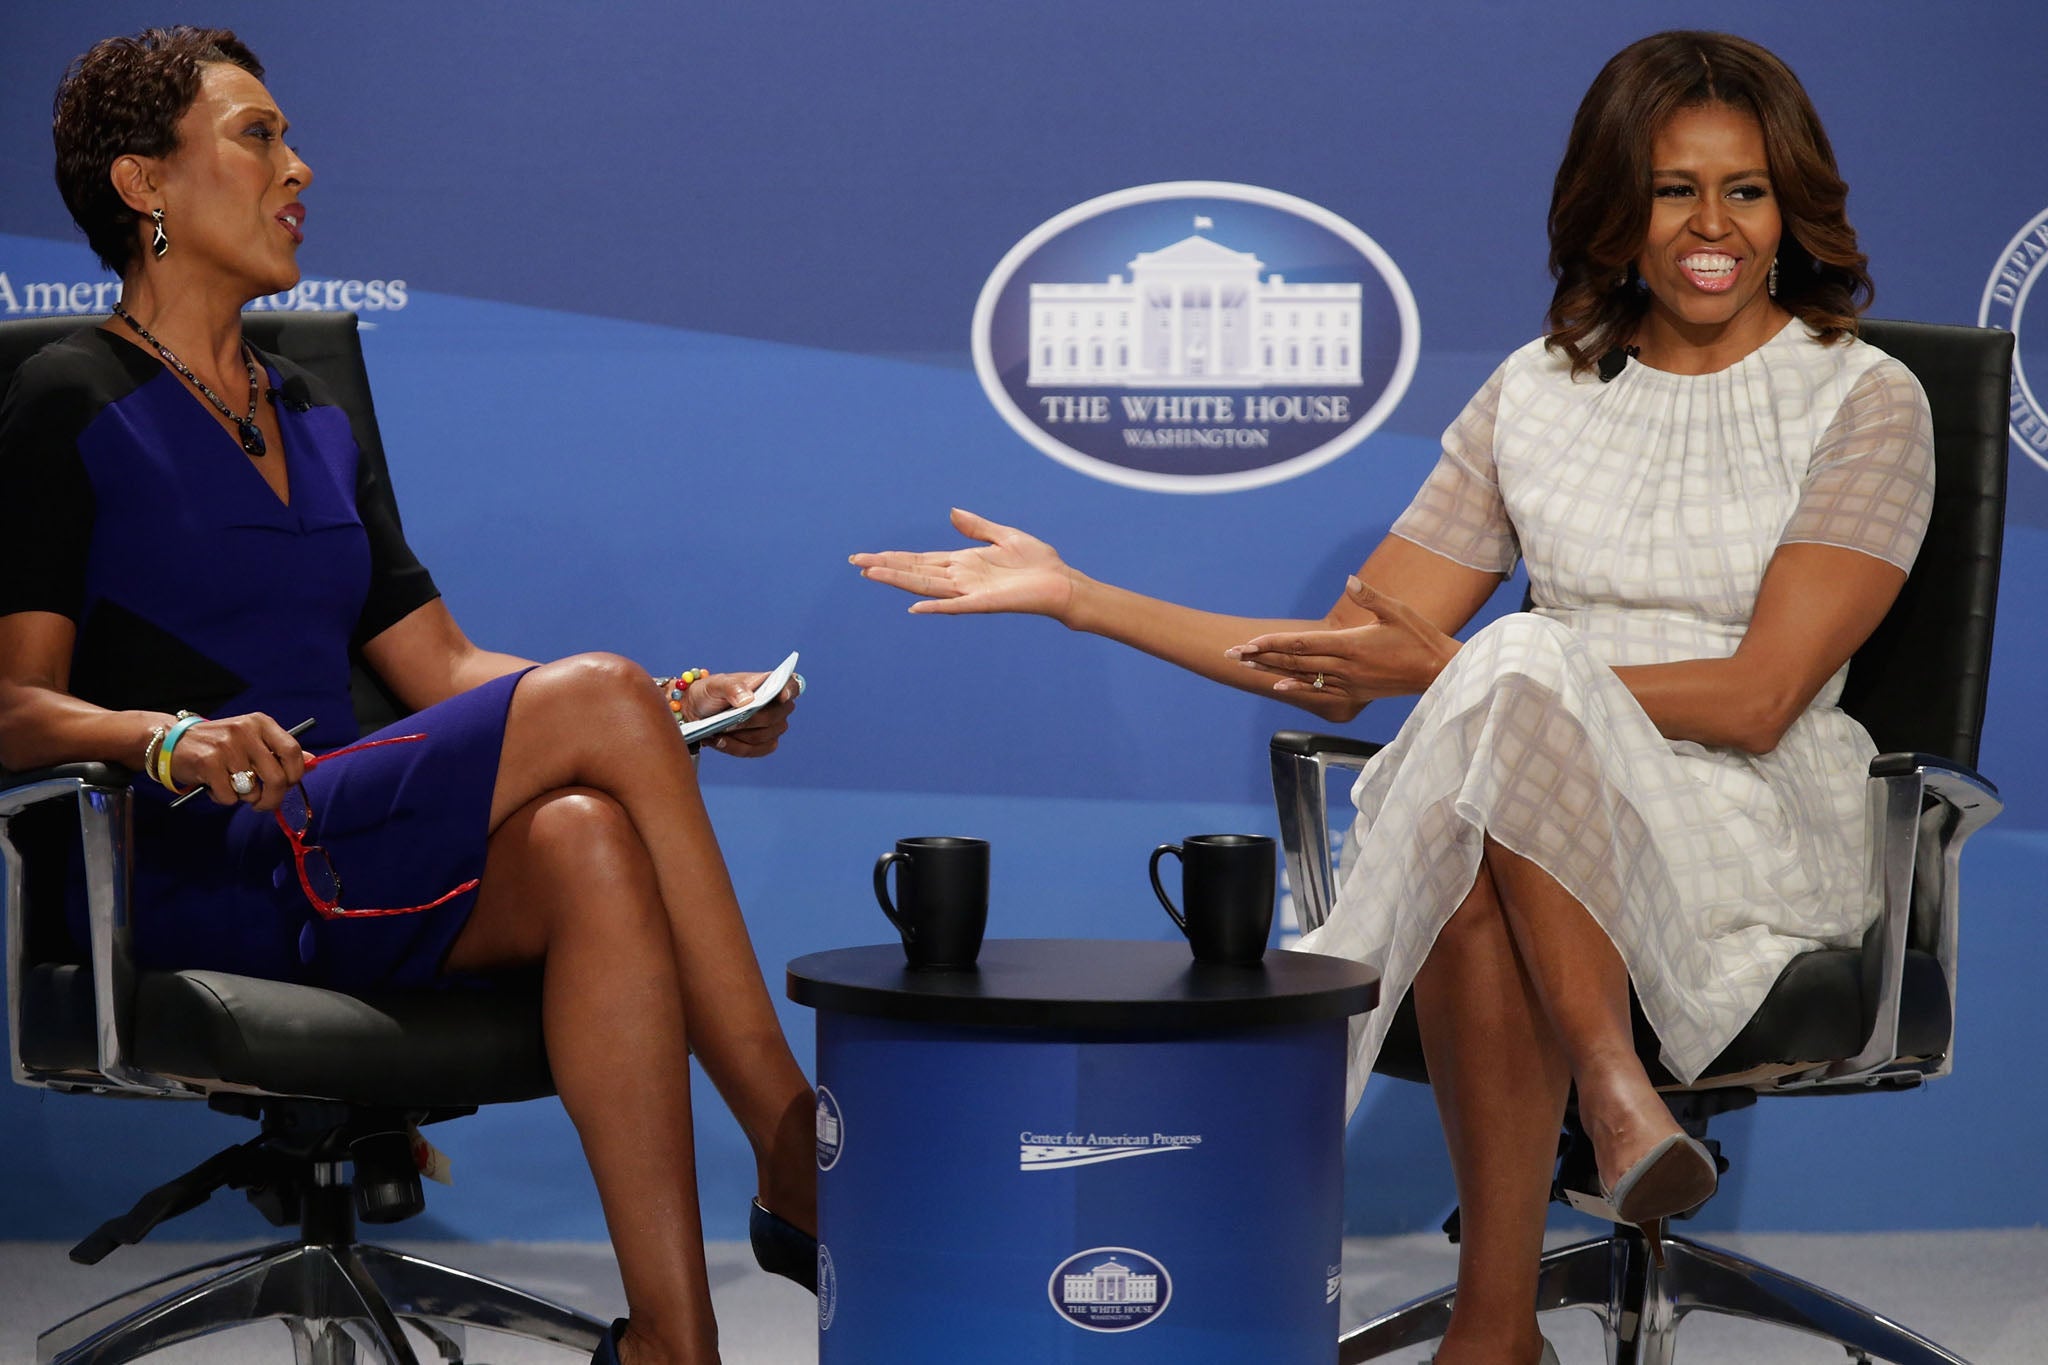 ABC reporter Robin Roberts and Michelle Obama in conversation during the White House summit on Working Families